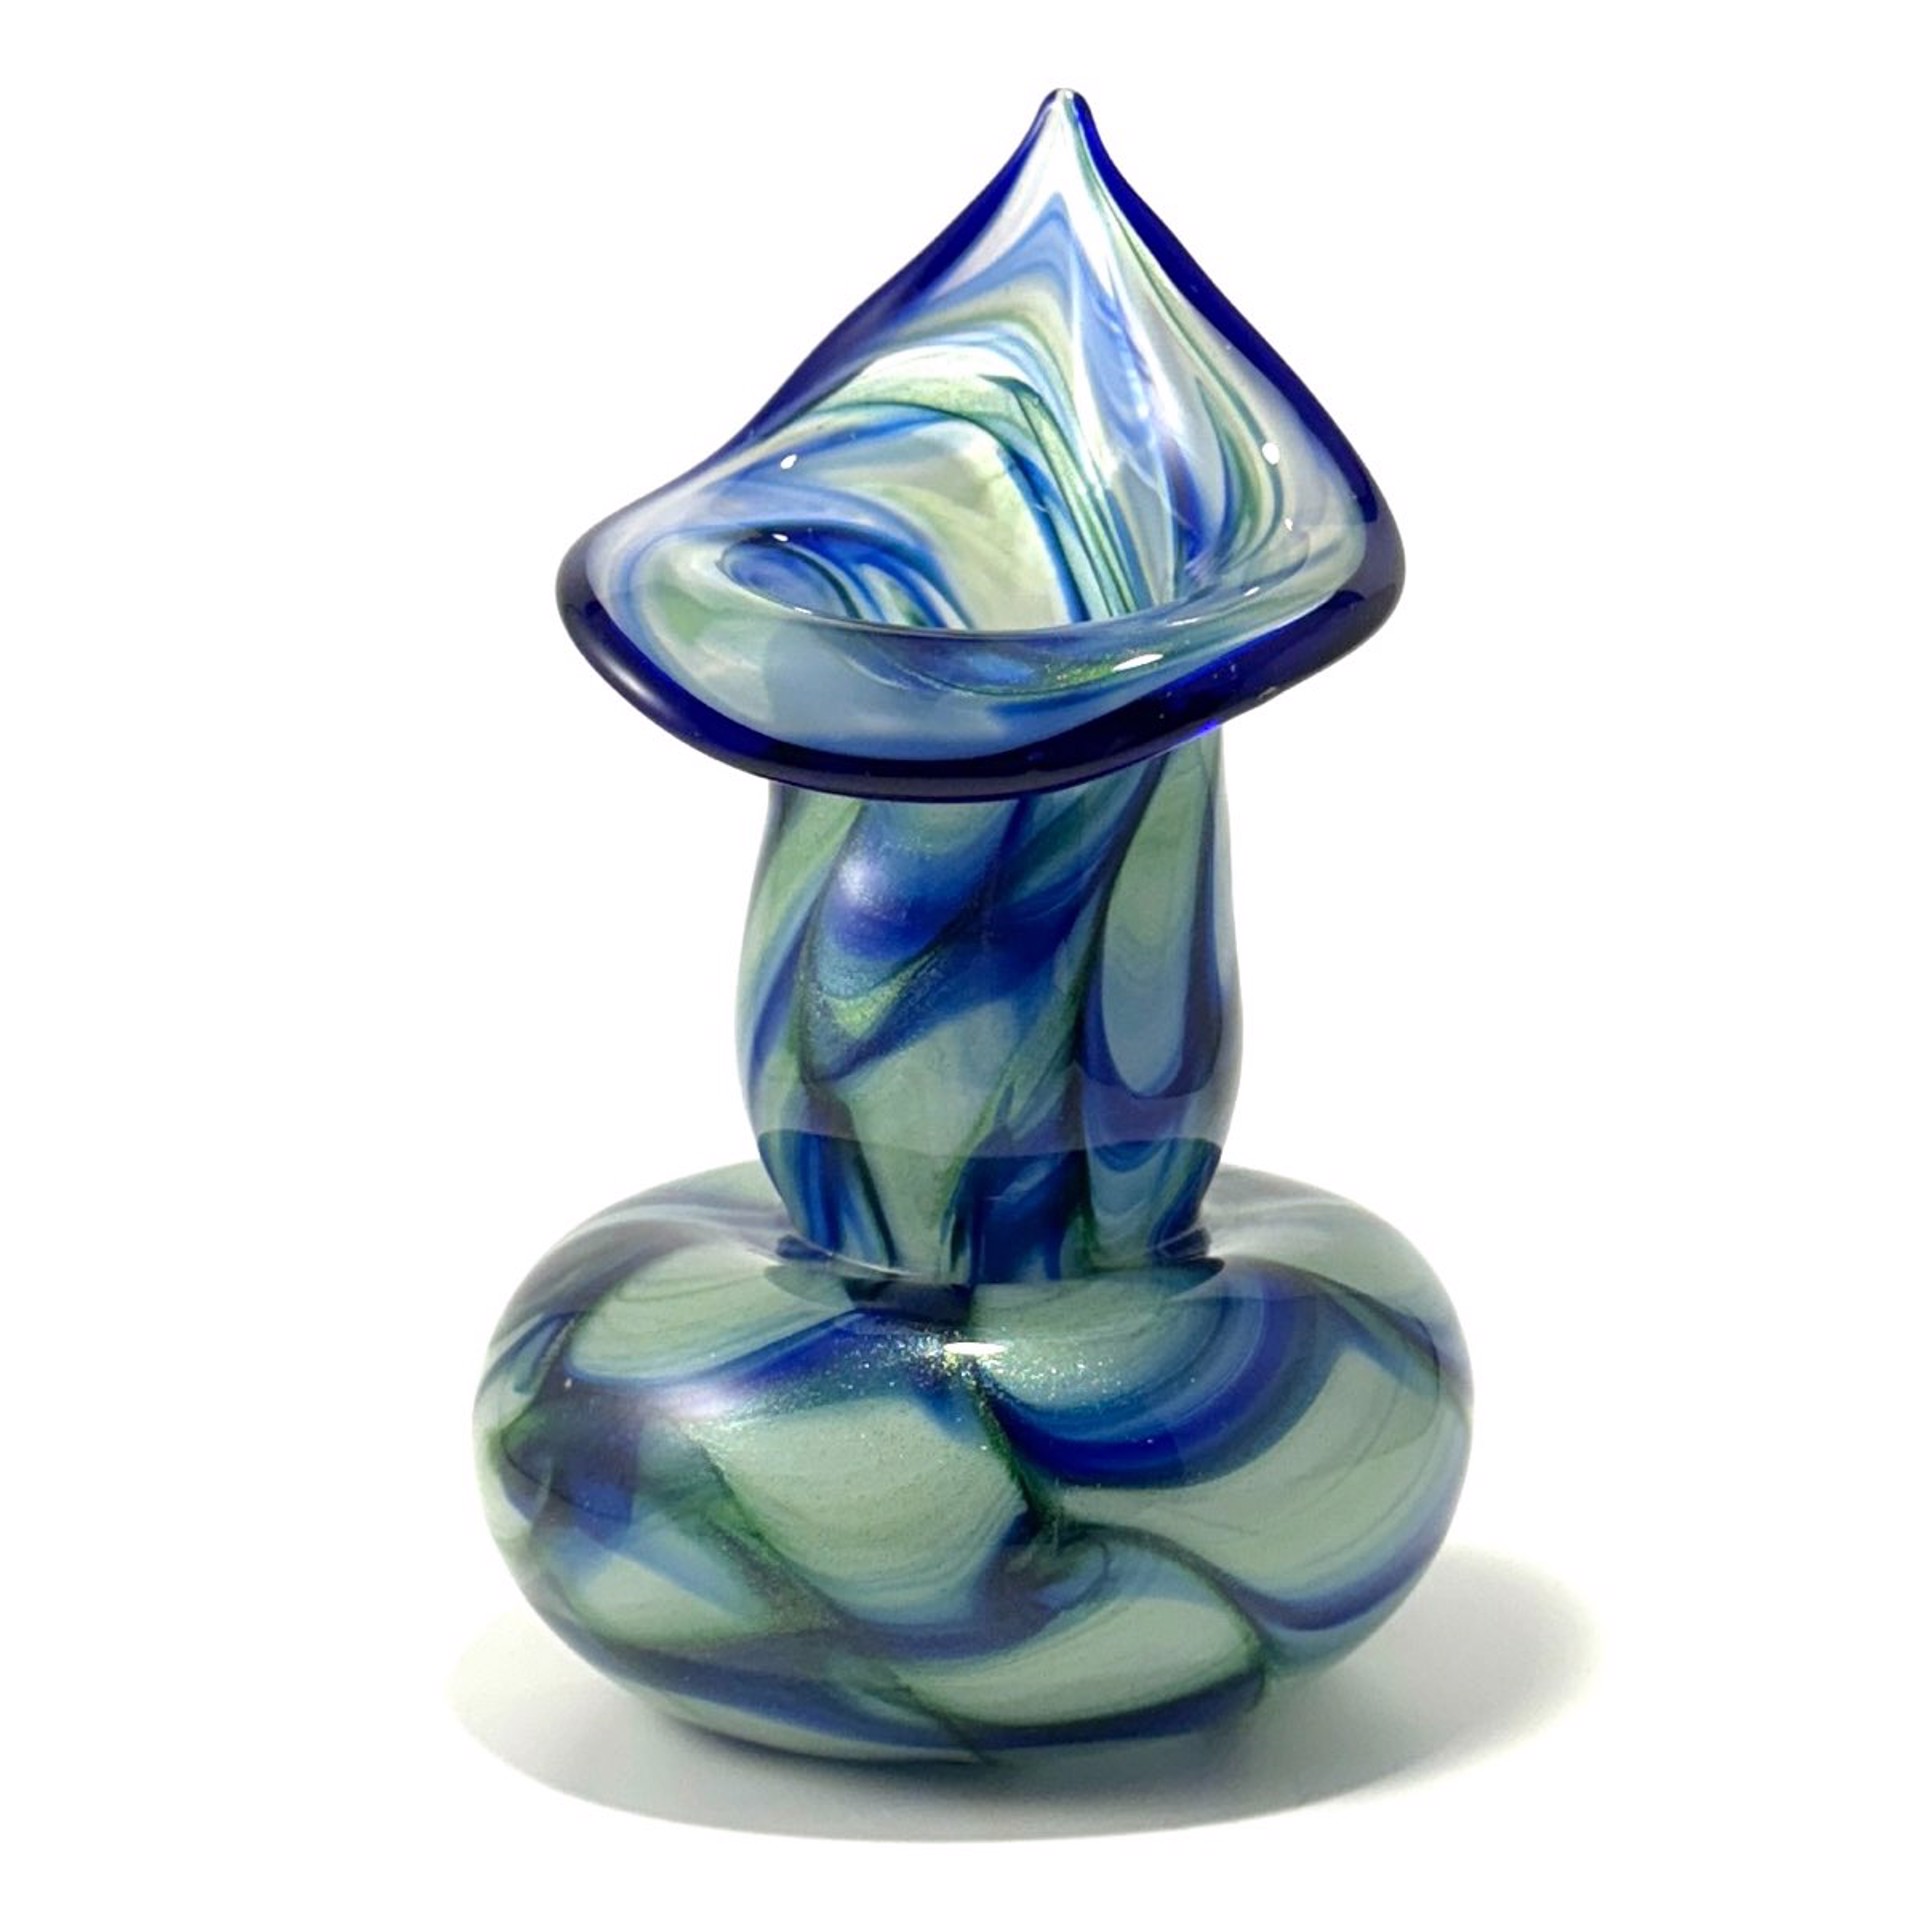 Wispy Blue and Green Lily Vase JG23-10 by John Glass